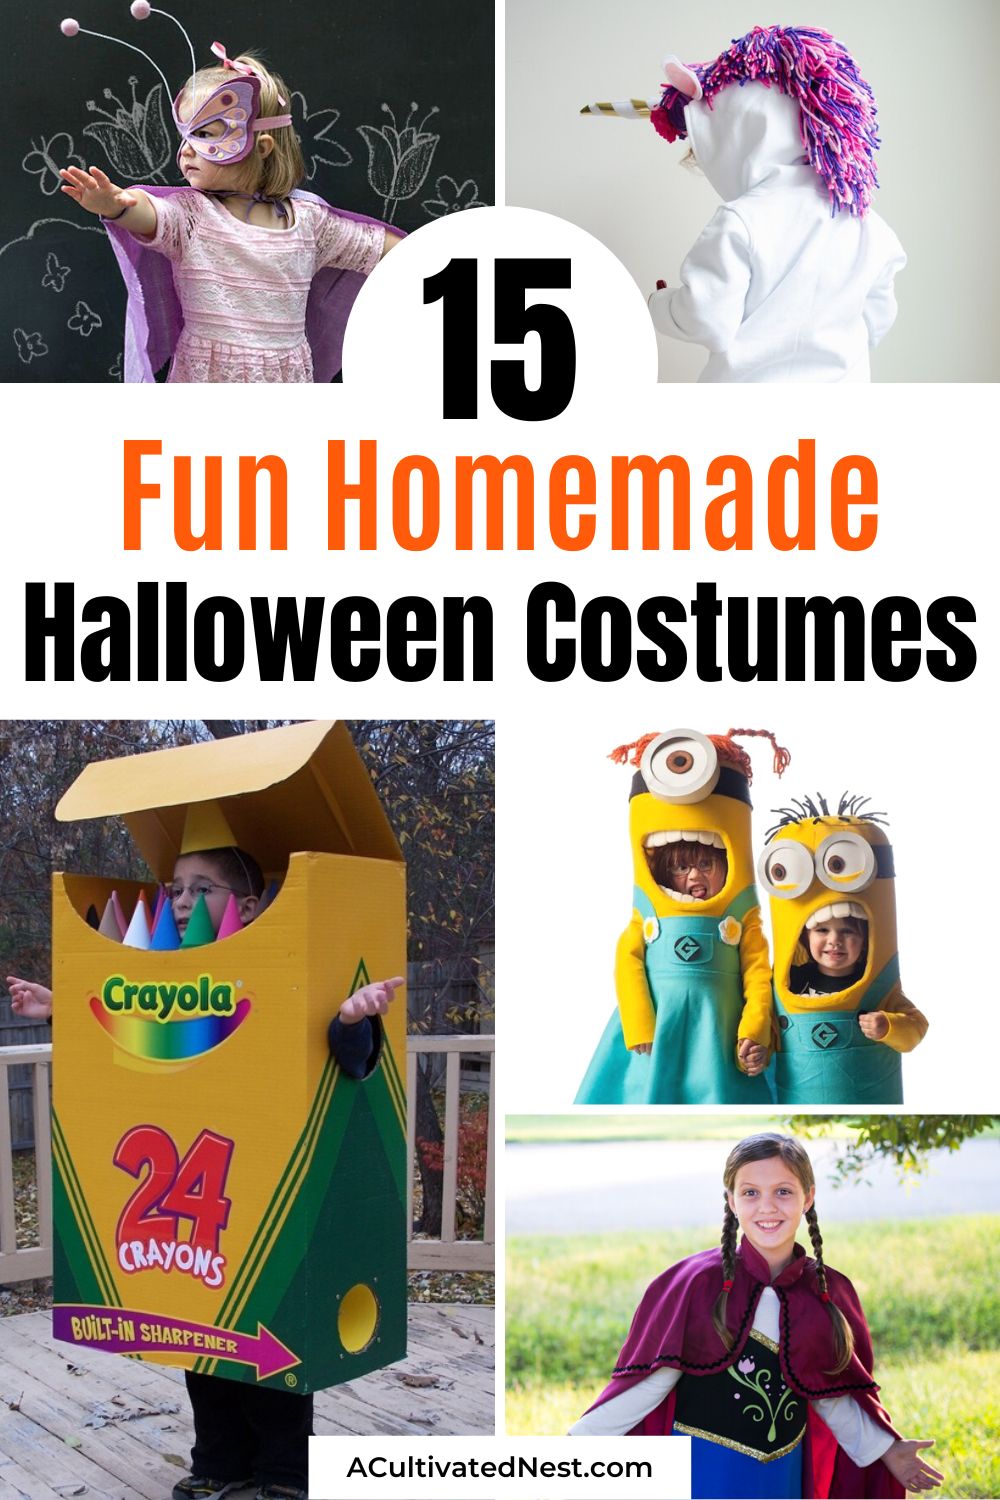 15 Frugal DIY Halloween Costumes- Store-bought Halloween costumes can be expensive. But you can give your child the costume of their dreams (on a budget) by making one of these frugal DIY Halloween costumes! | homemade Halloween costume, #Halloween #diyProject #sewing #homemadeHalloweenCostumes #ACultivatedNest